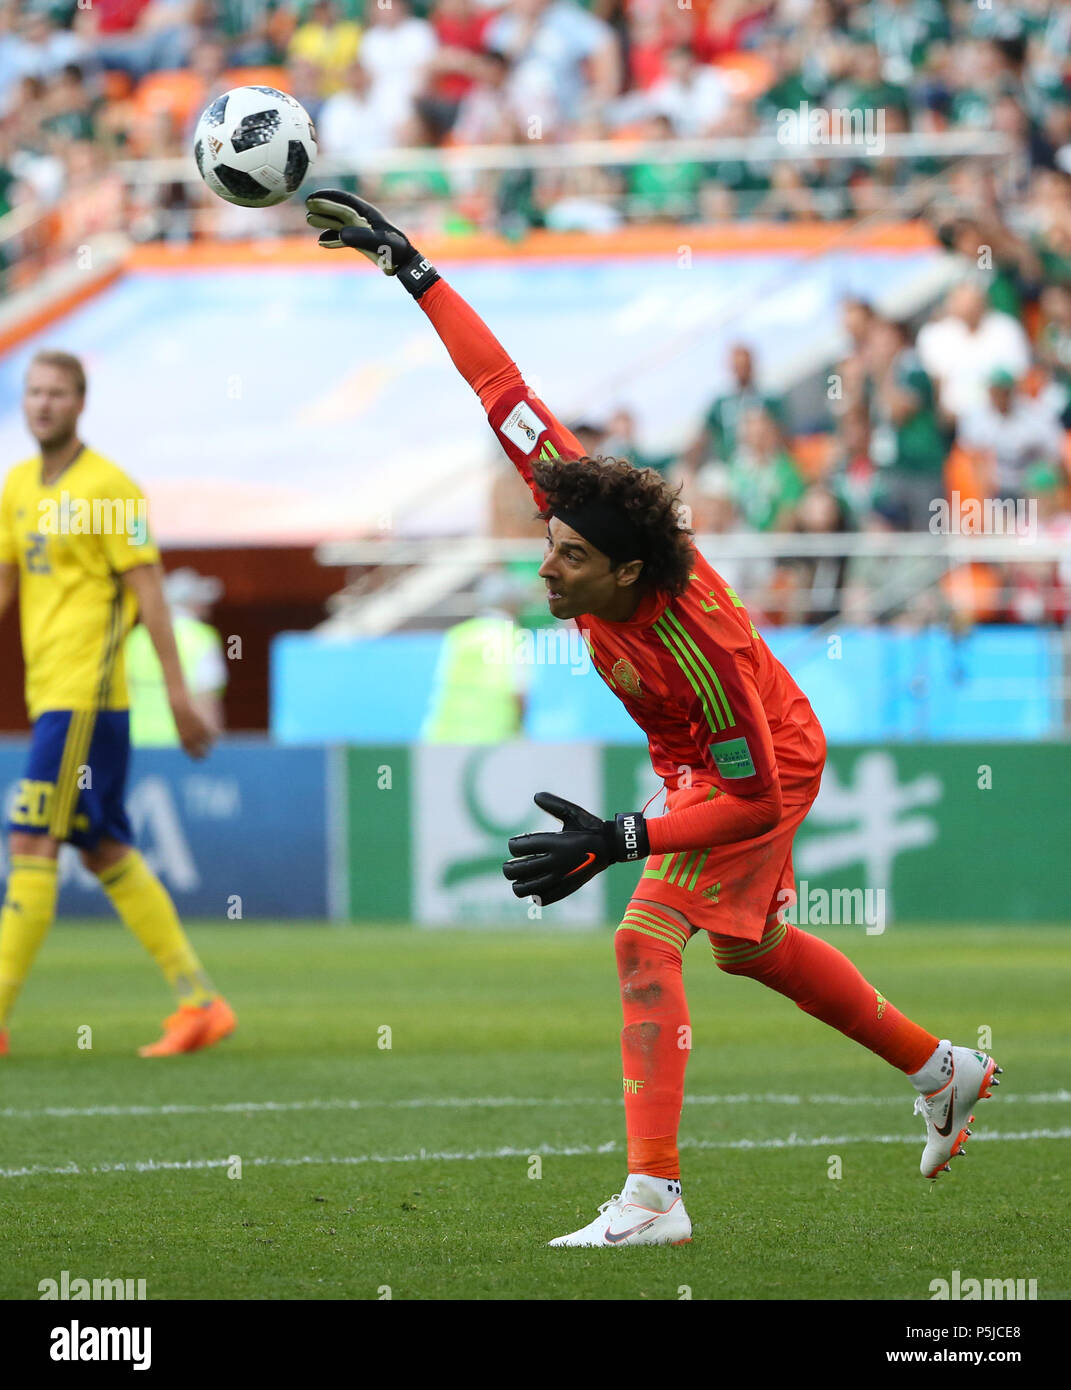 Yekaterinburg, Russia. 27th June, 2018. Goalkeeper Guillermo Ochoa of Mexico competes during the 2018 FIFA World Cup Group F match between Mexico and Sweden in Yekaterinburg, Russia, June 27, 2018. Credit: Li Ming/Xinhua/Alamy Live News Stock Photo